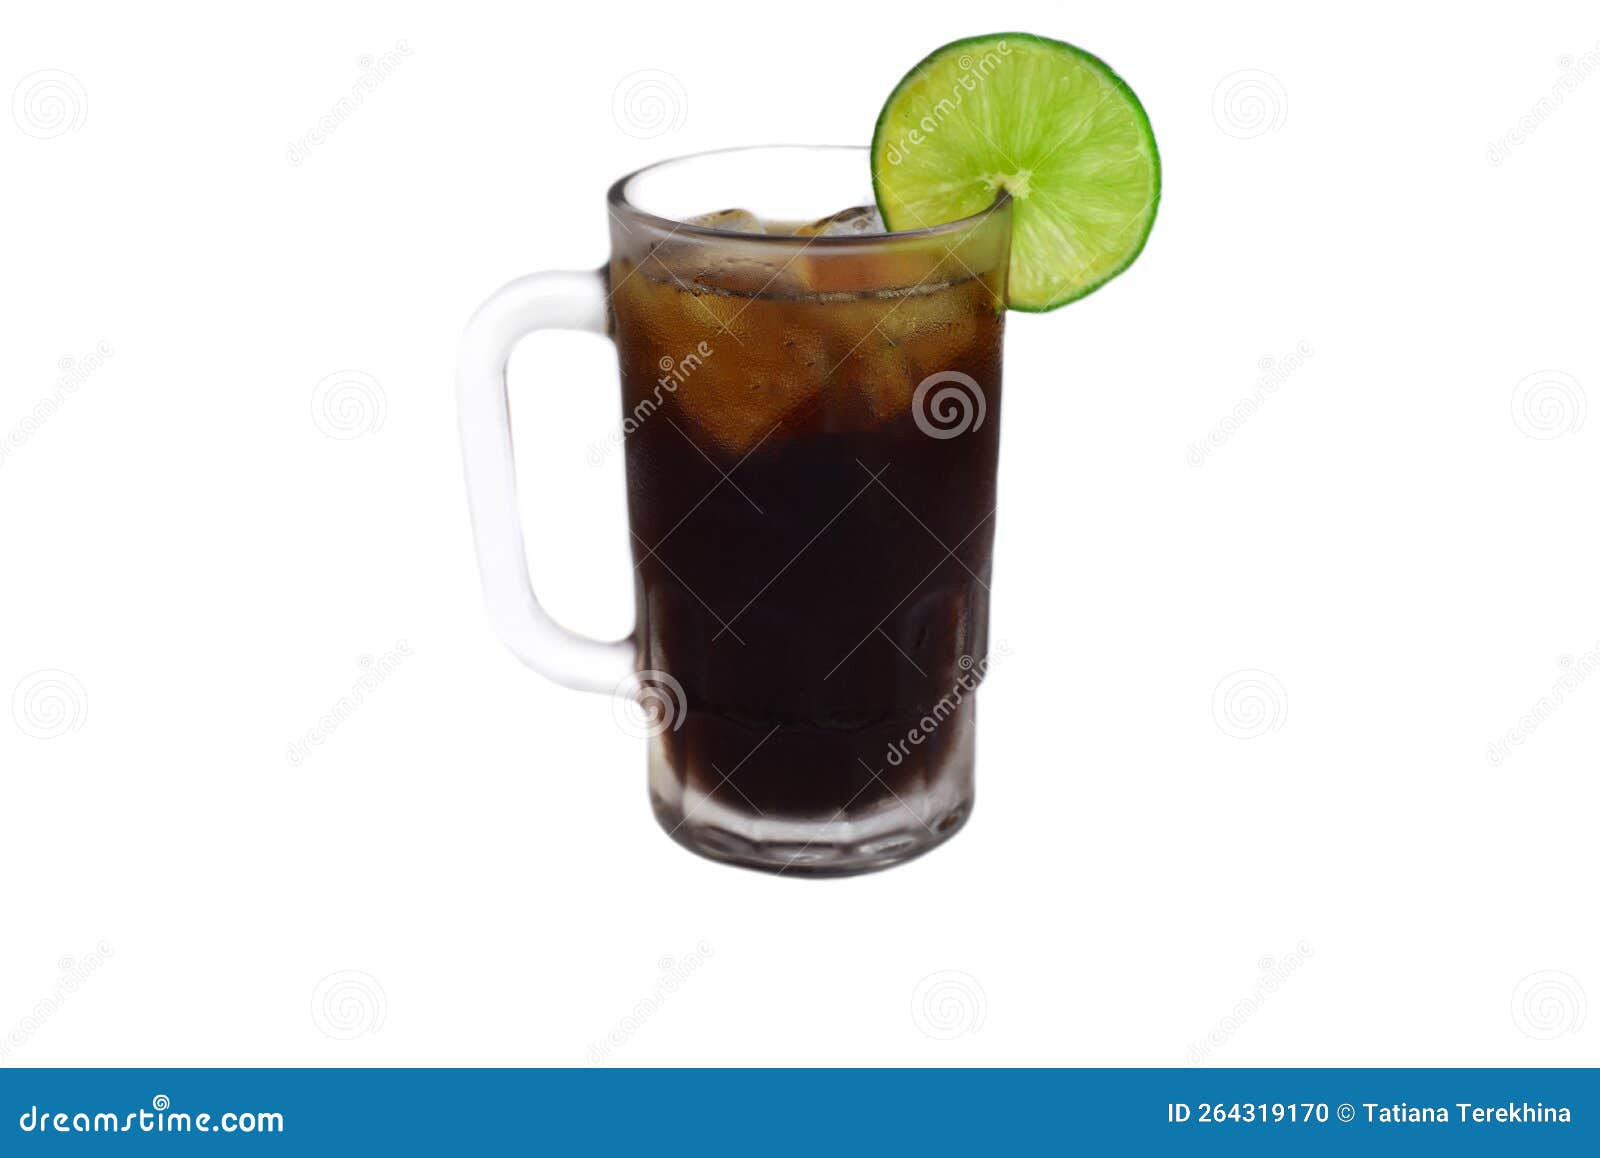 mexican drink charro negro made of tequila and soda with lime  on white background